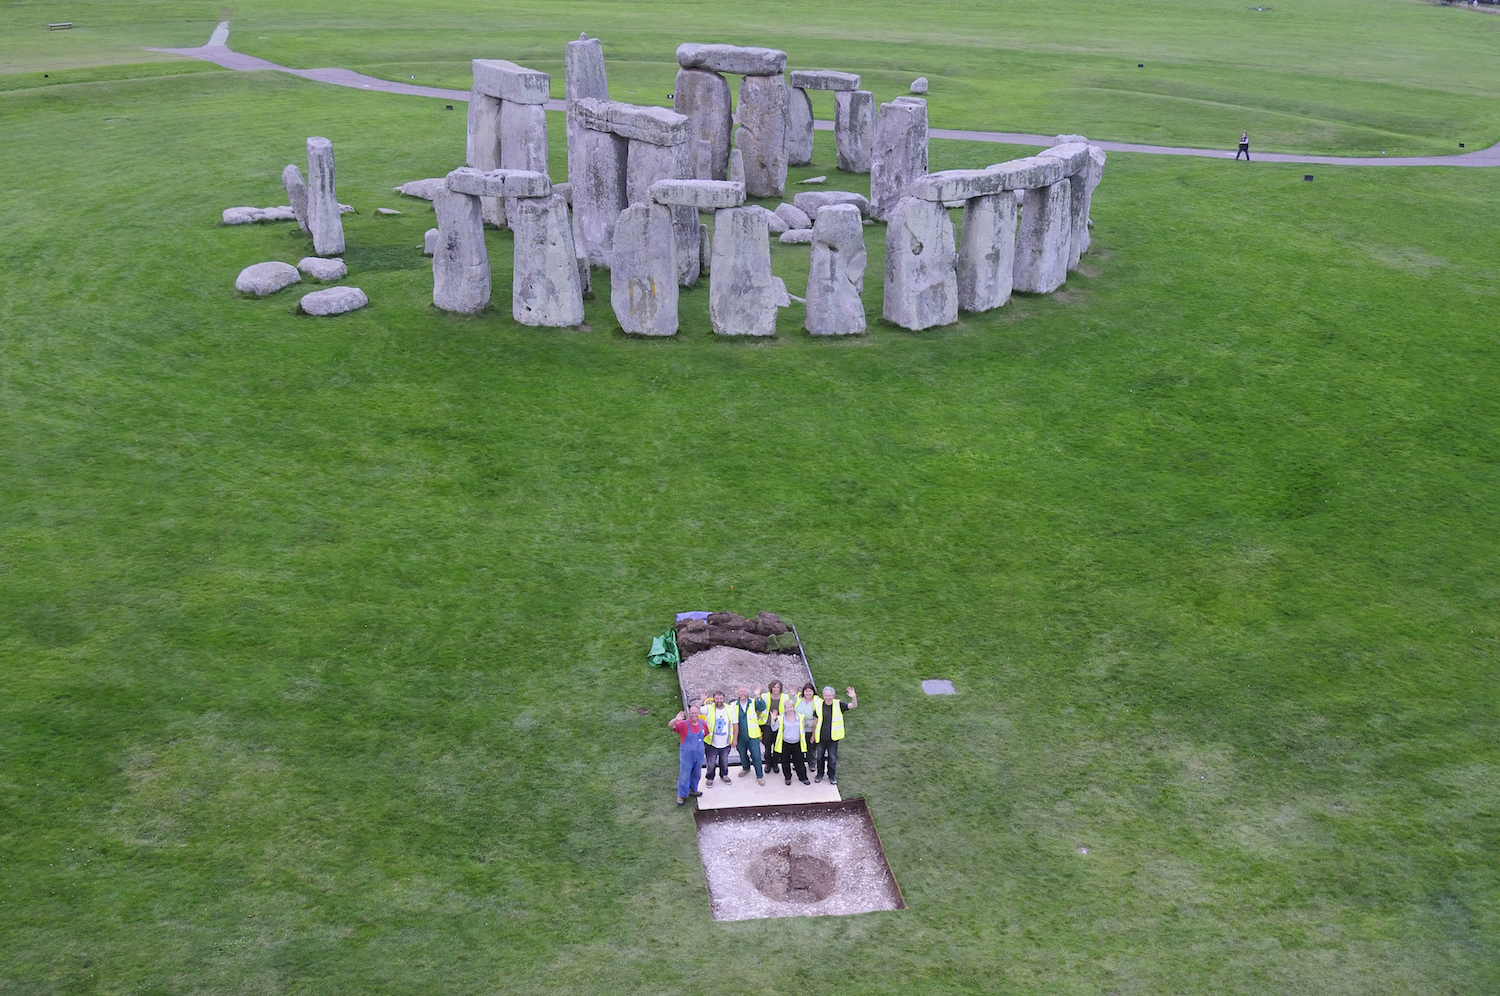  An aerial view of Stonehenge with a group of archaeologists standing in the foreground near an excavation site.